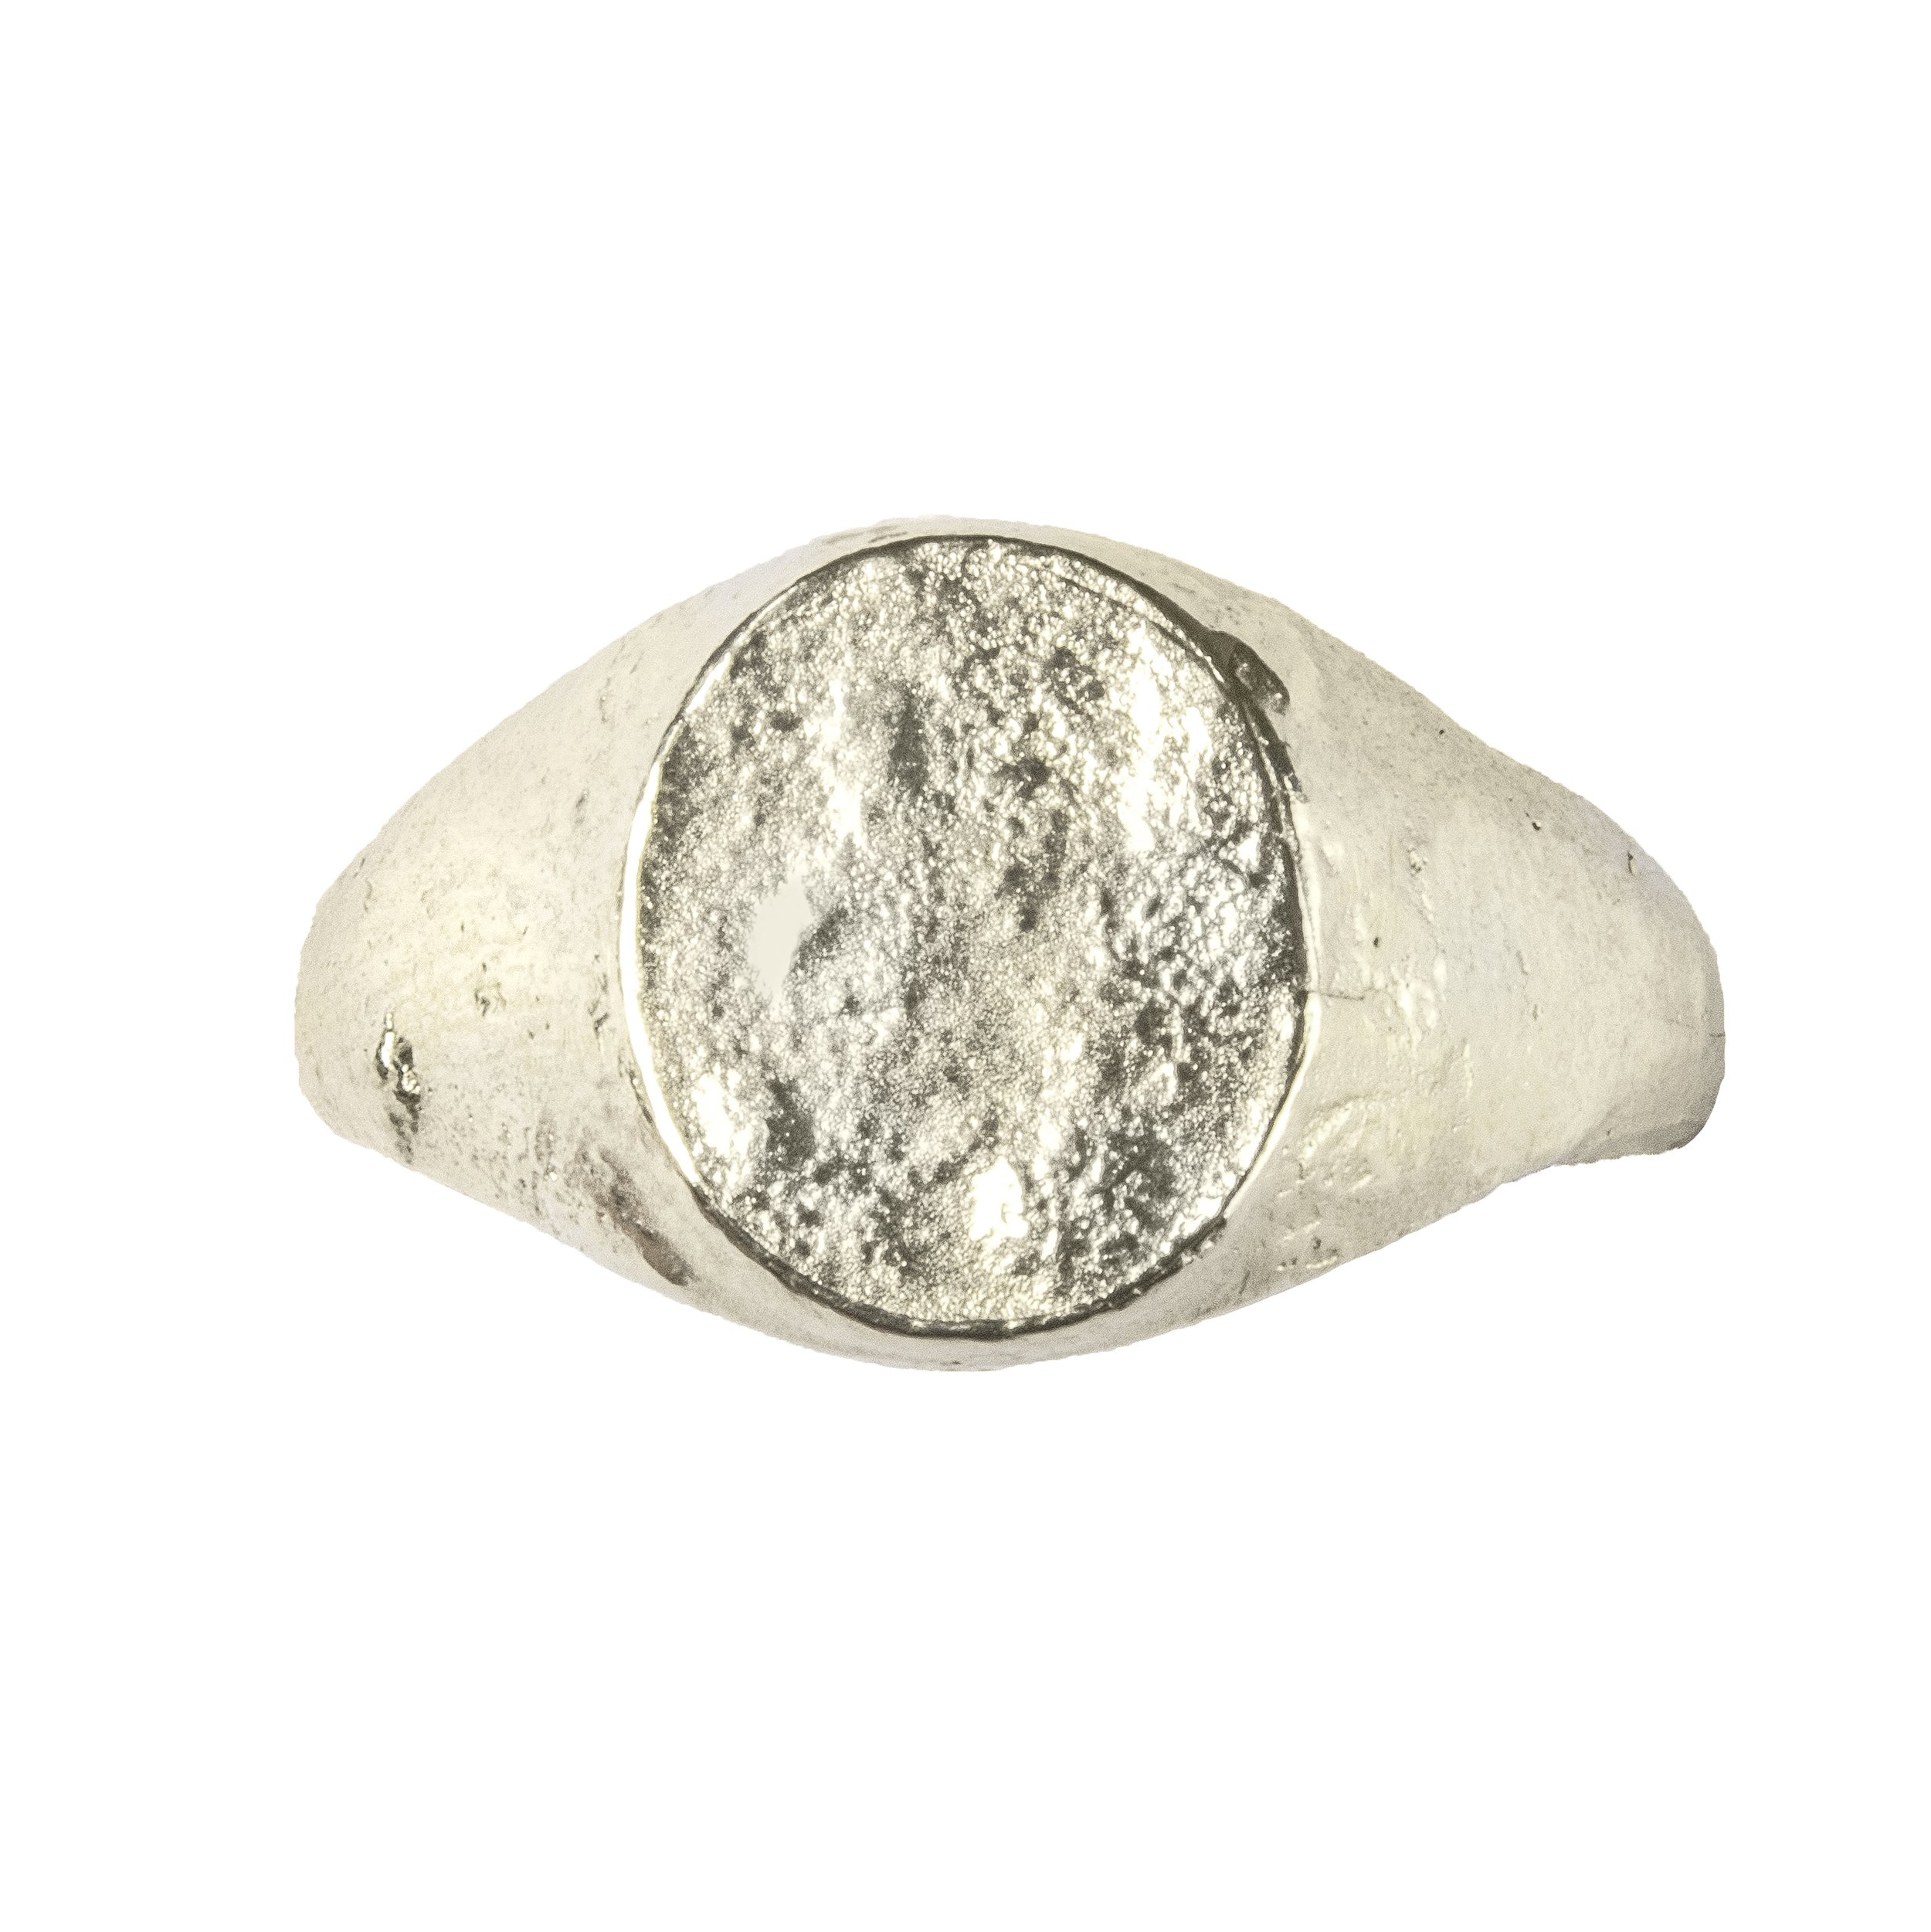 9ct white gold light weight signet ring